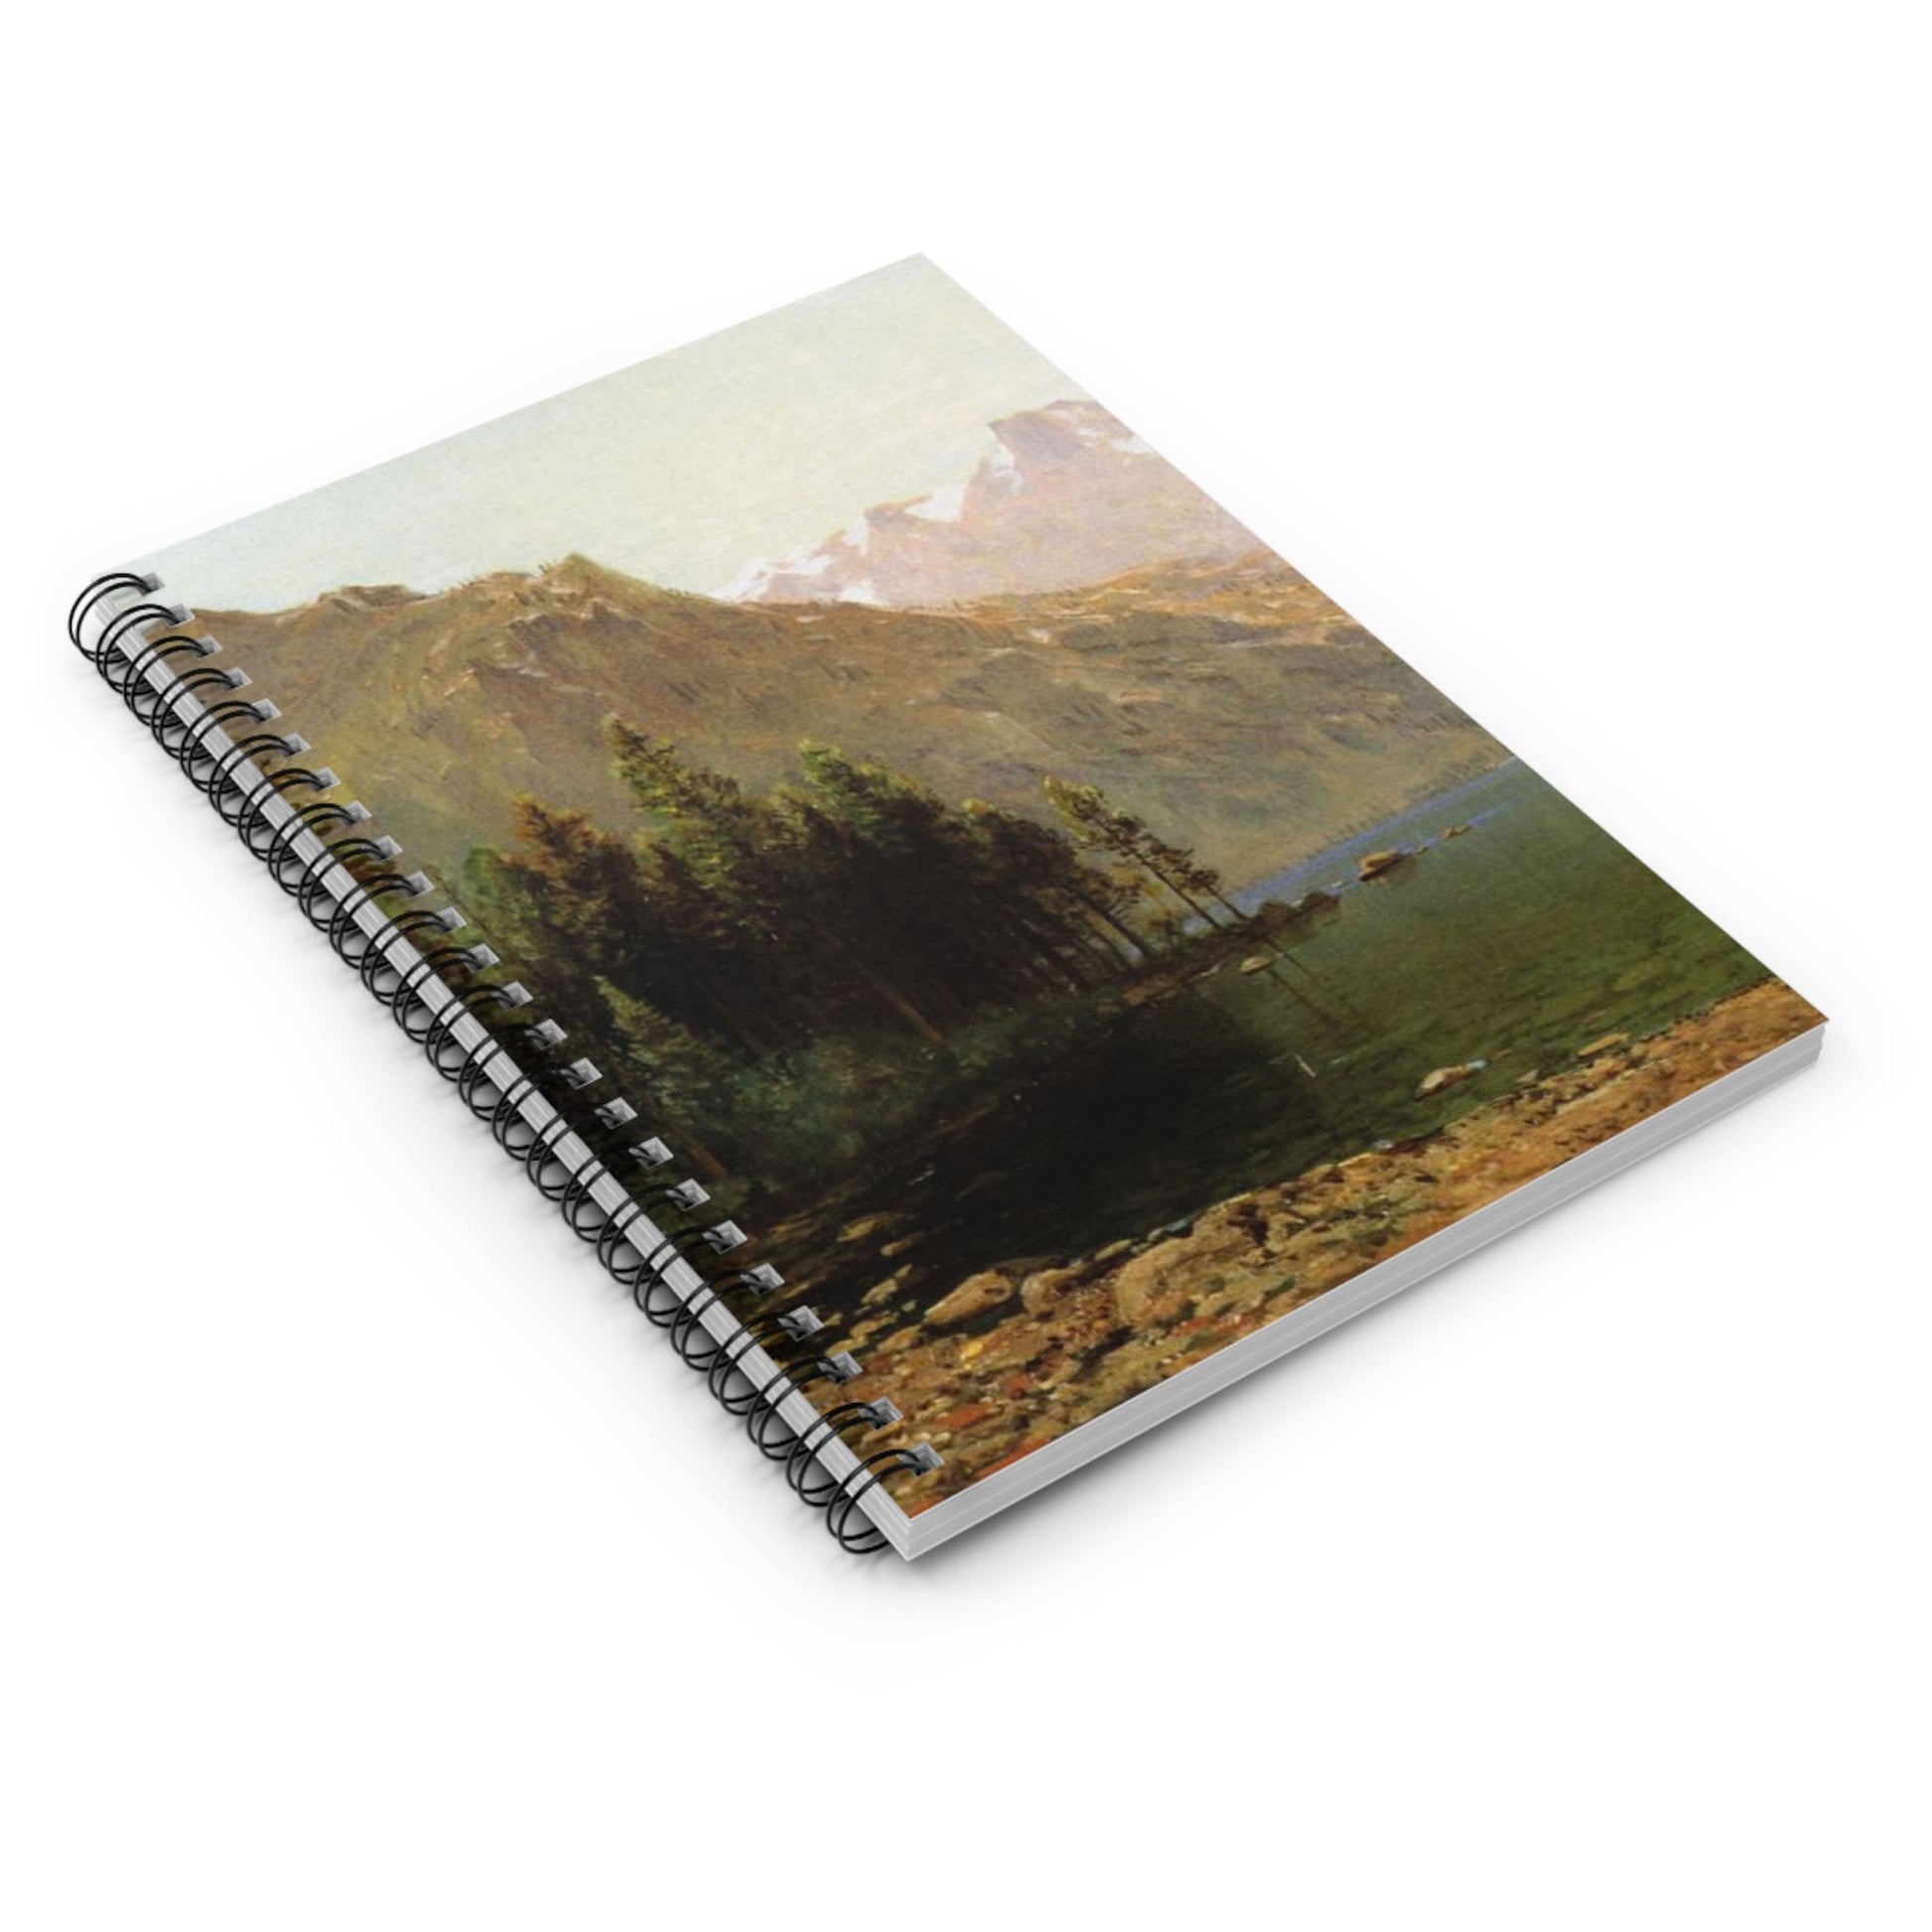 Lake and Mountains Spiral Notebook Laying Flat on White Surface